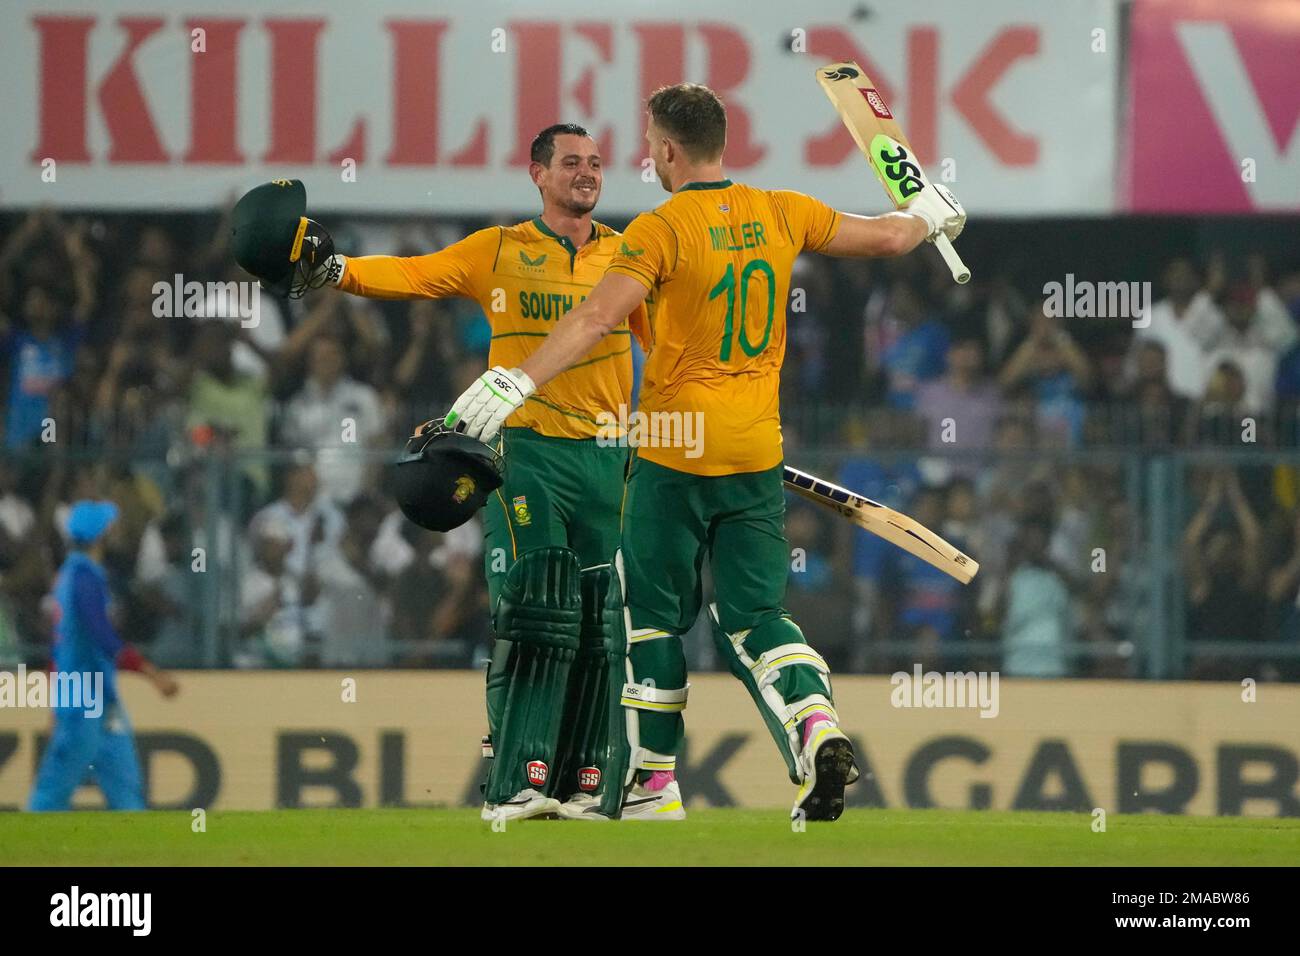 South Africas David Miller, right, celebrates with batting partner Quinton de Kock after scoring a century during the second T20 cricket match between India and South Africa, in Guwahati, India, Sunday, Oct.